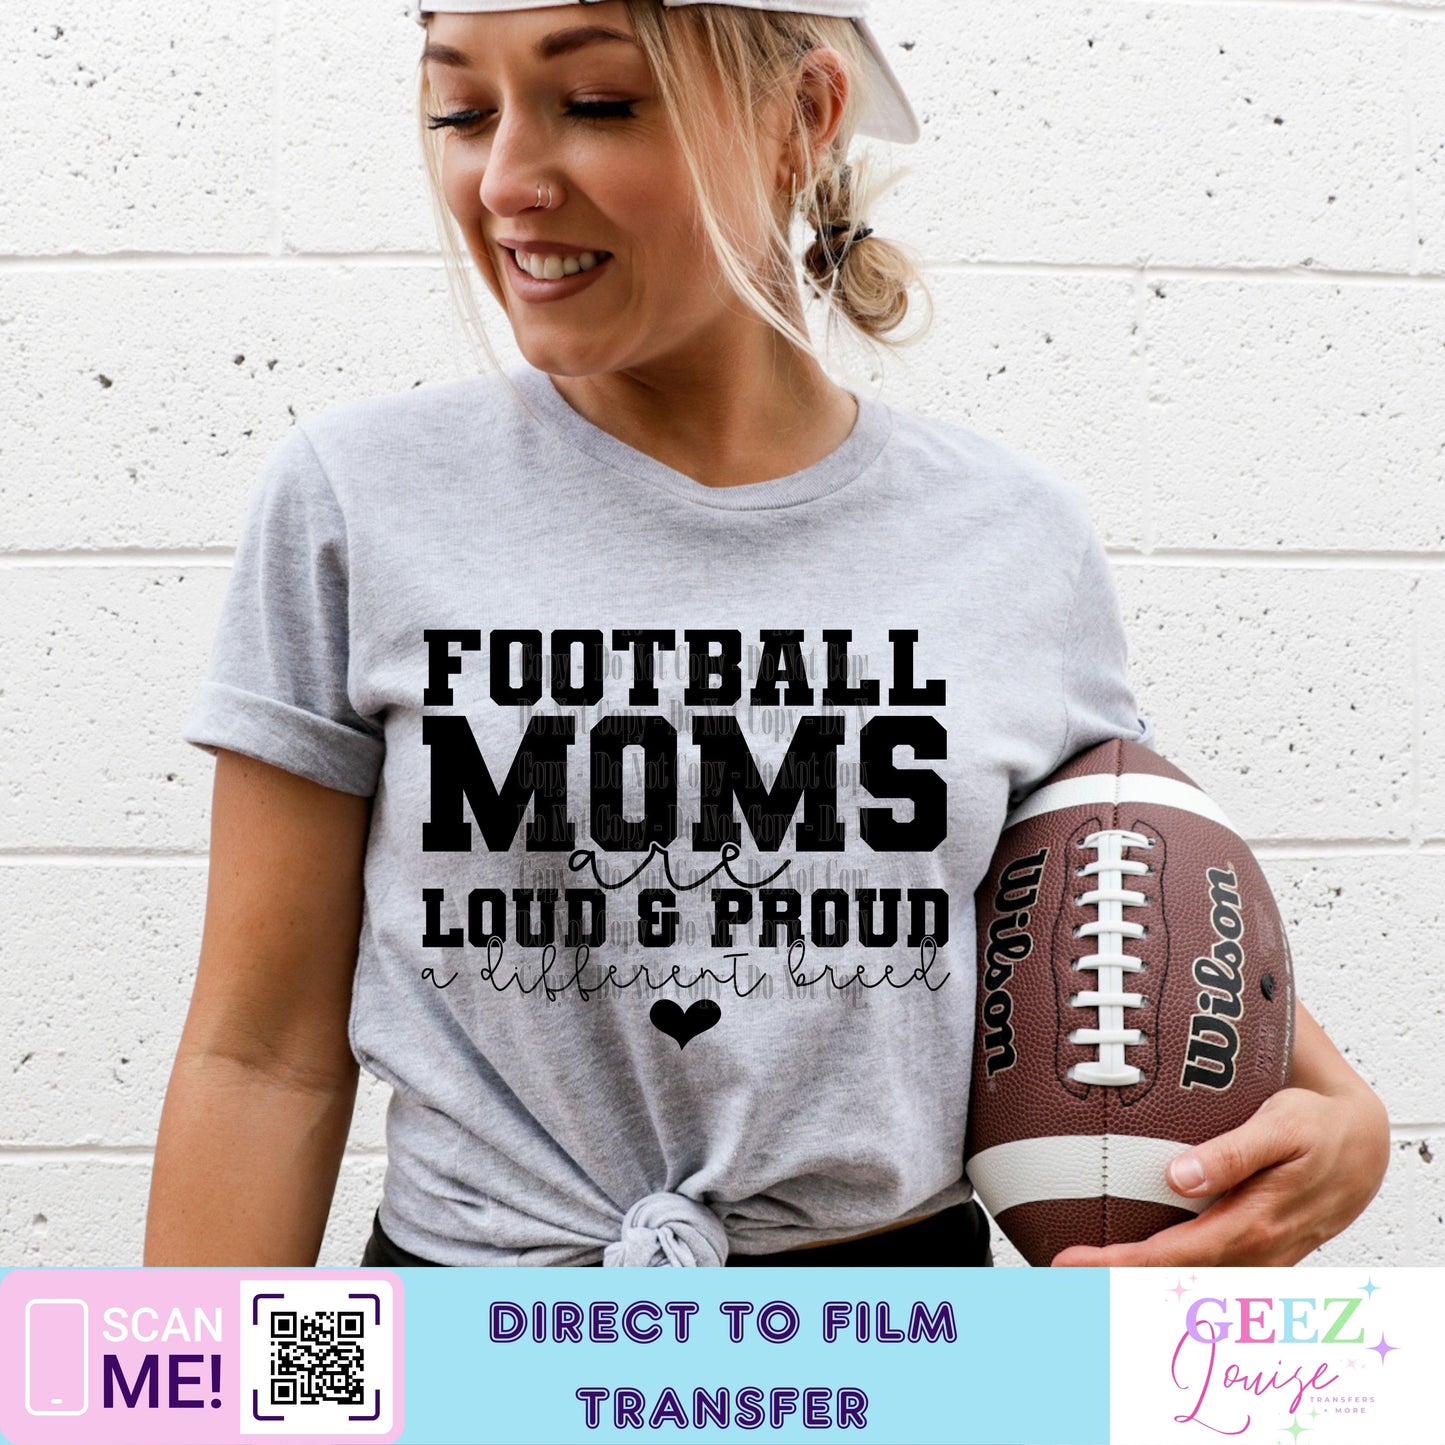 Football moms are loud and proud - Direct to Film Transfer - made to order